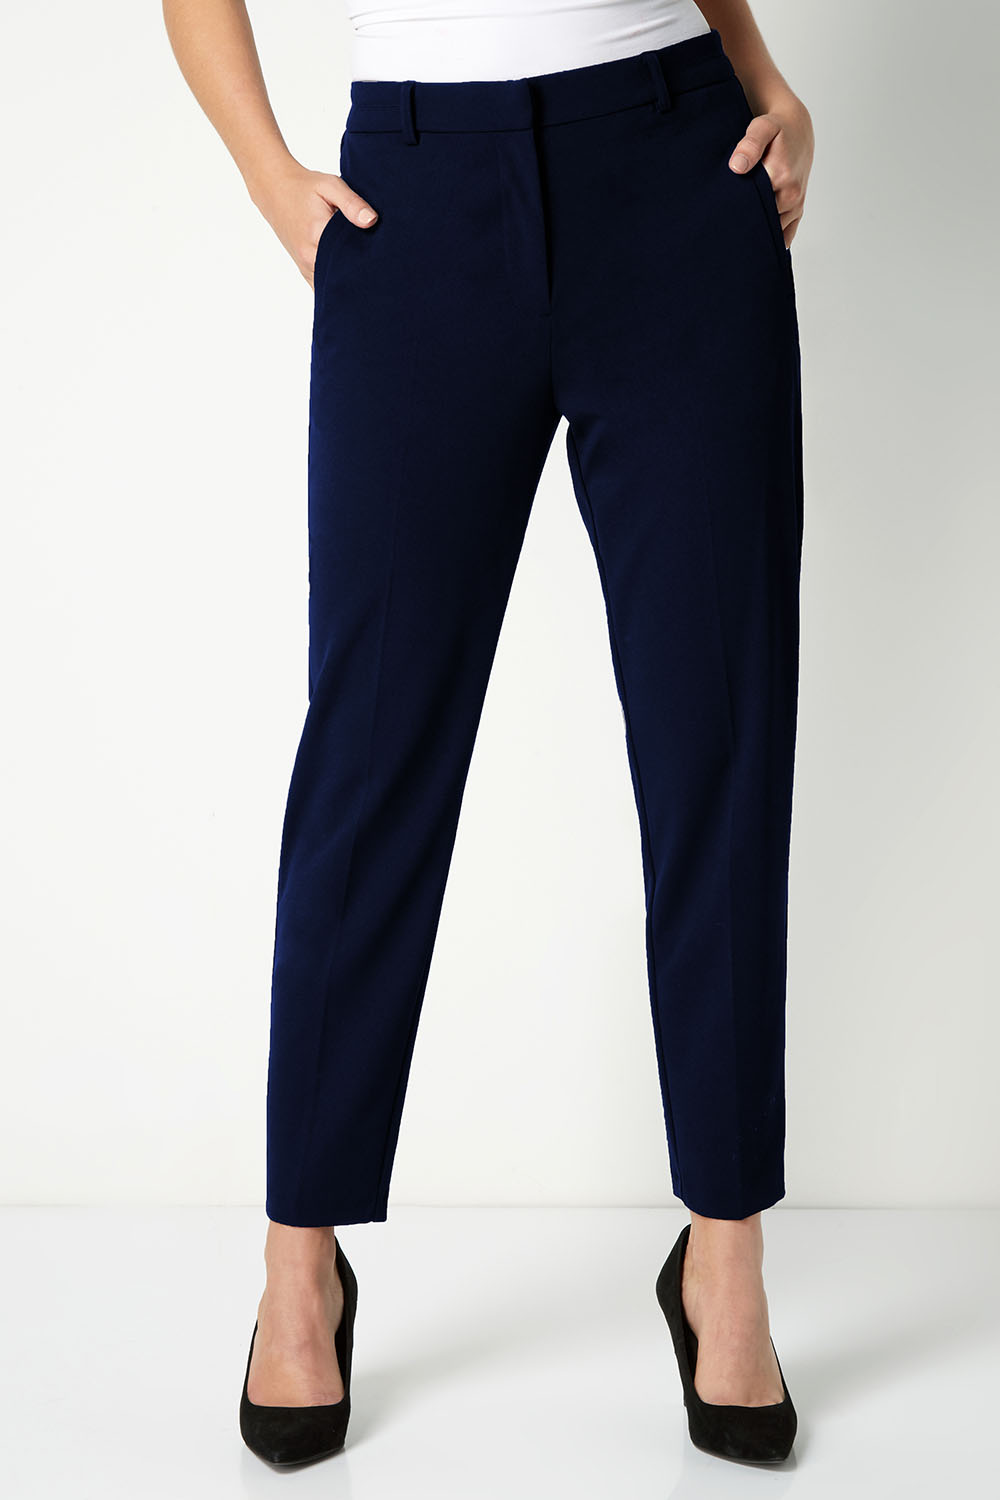 Navy  Tapered Soft Jersey Trouser  WoolOvers UK